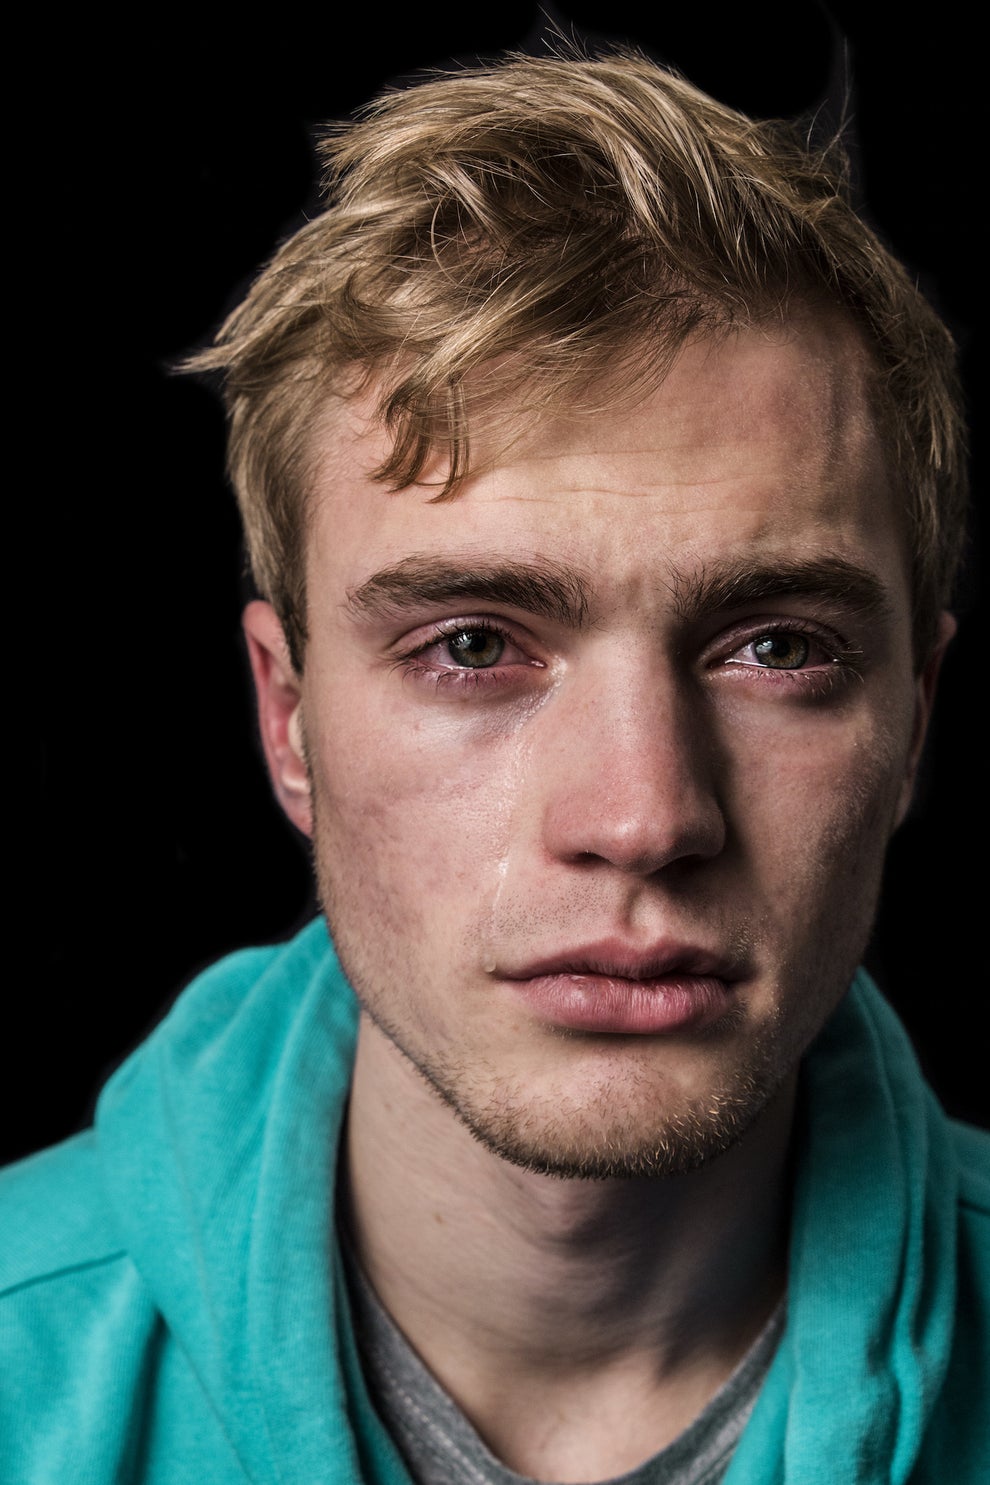 18 Photos Of Men Crying That Challenge Gender Norms